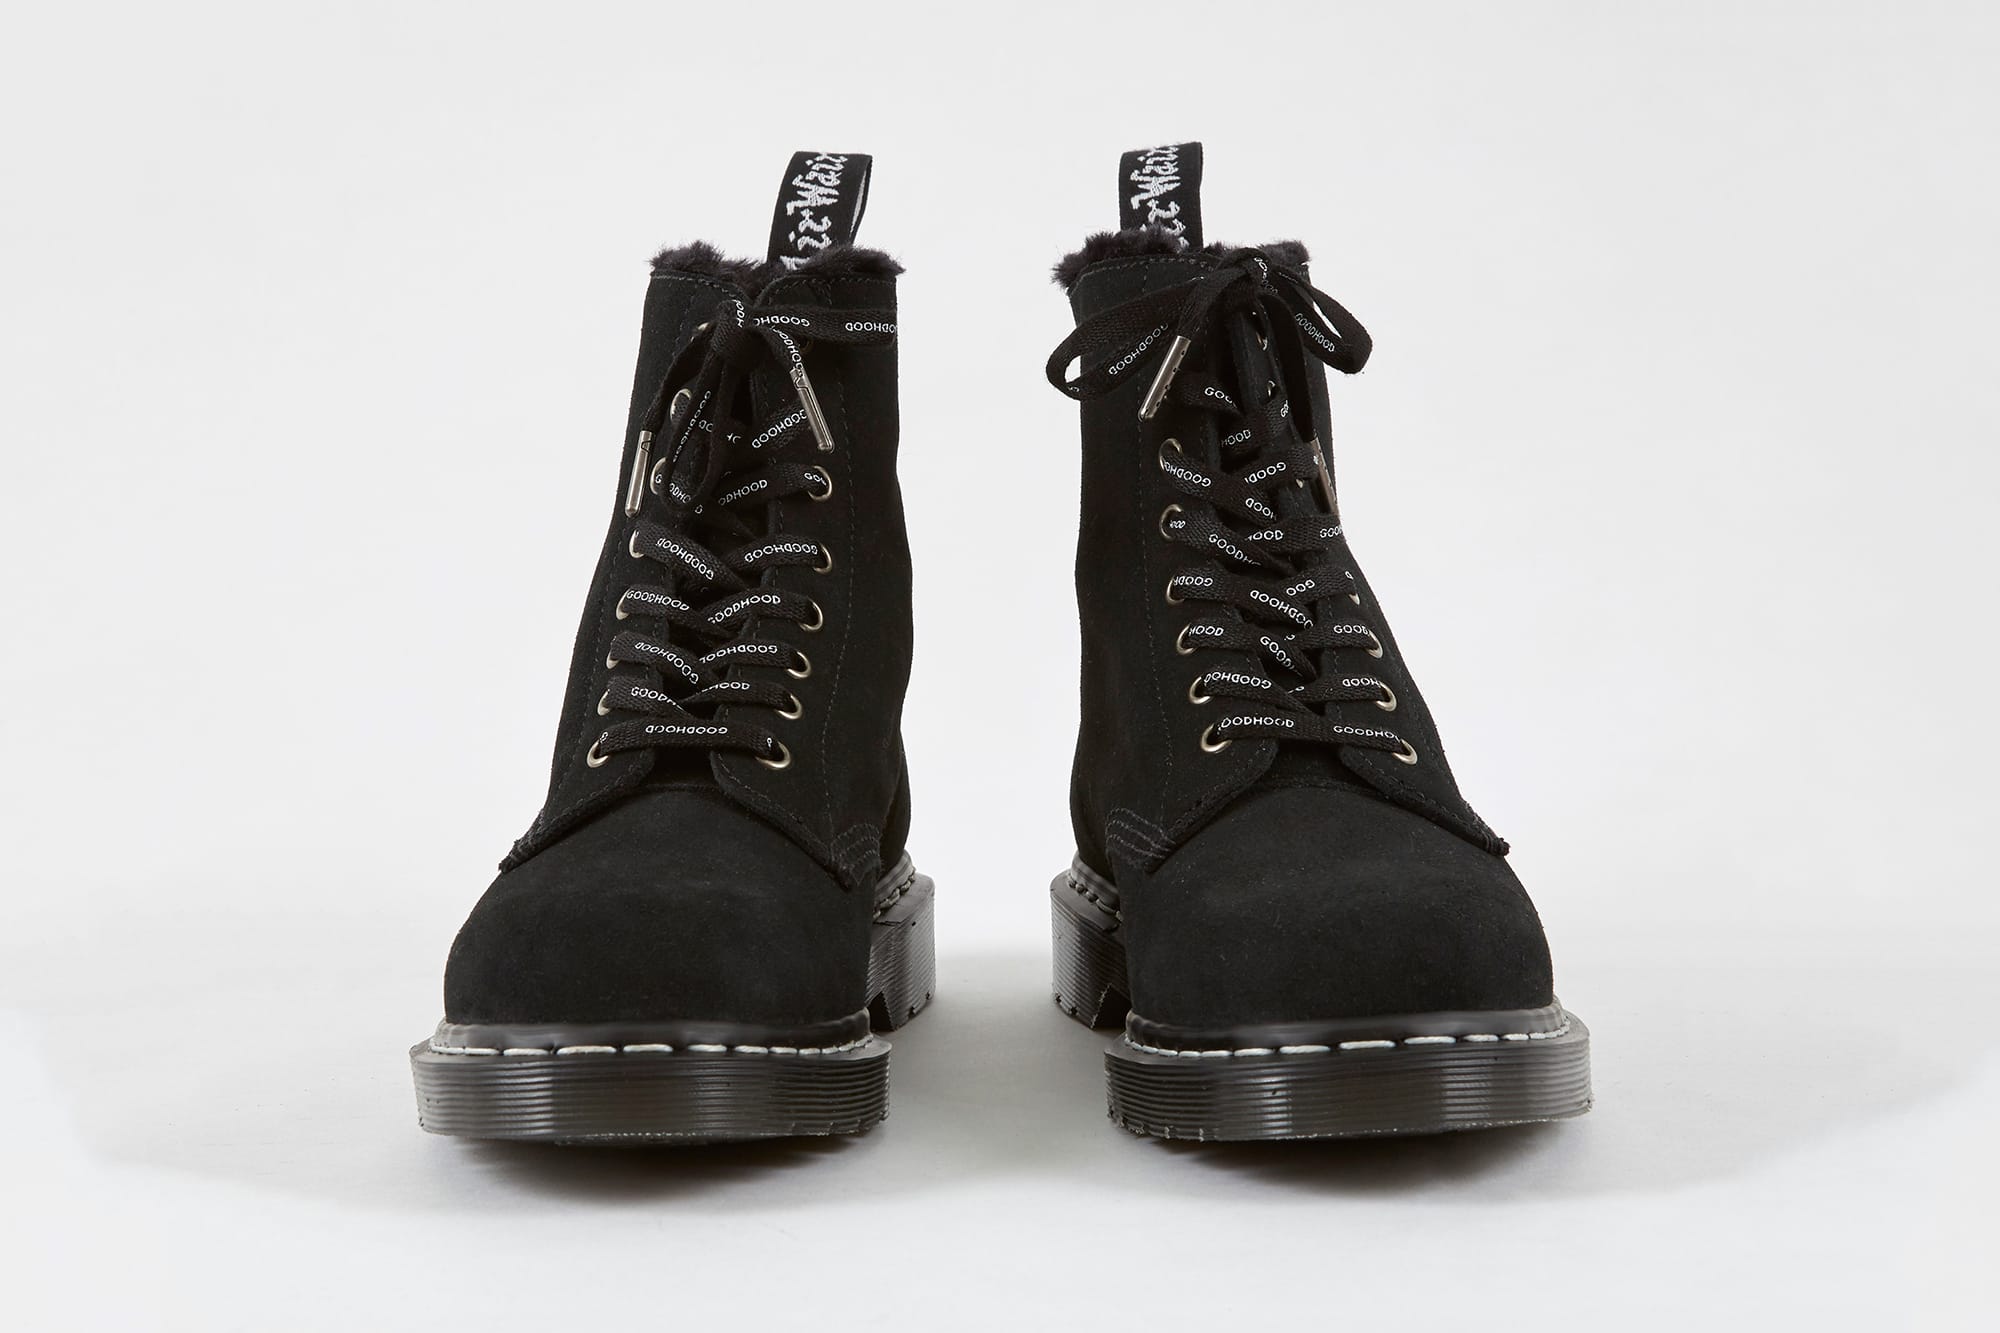 Goodhood x Dr. Martens Release 8 Hole 